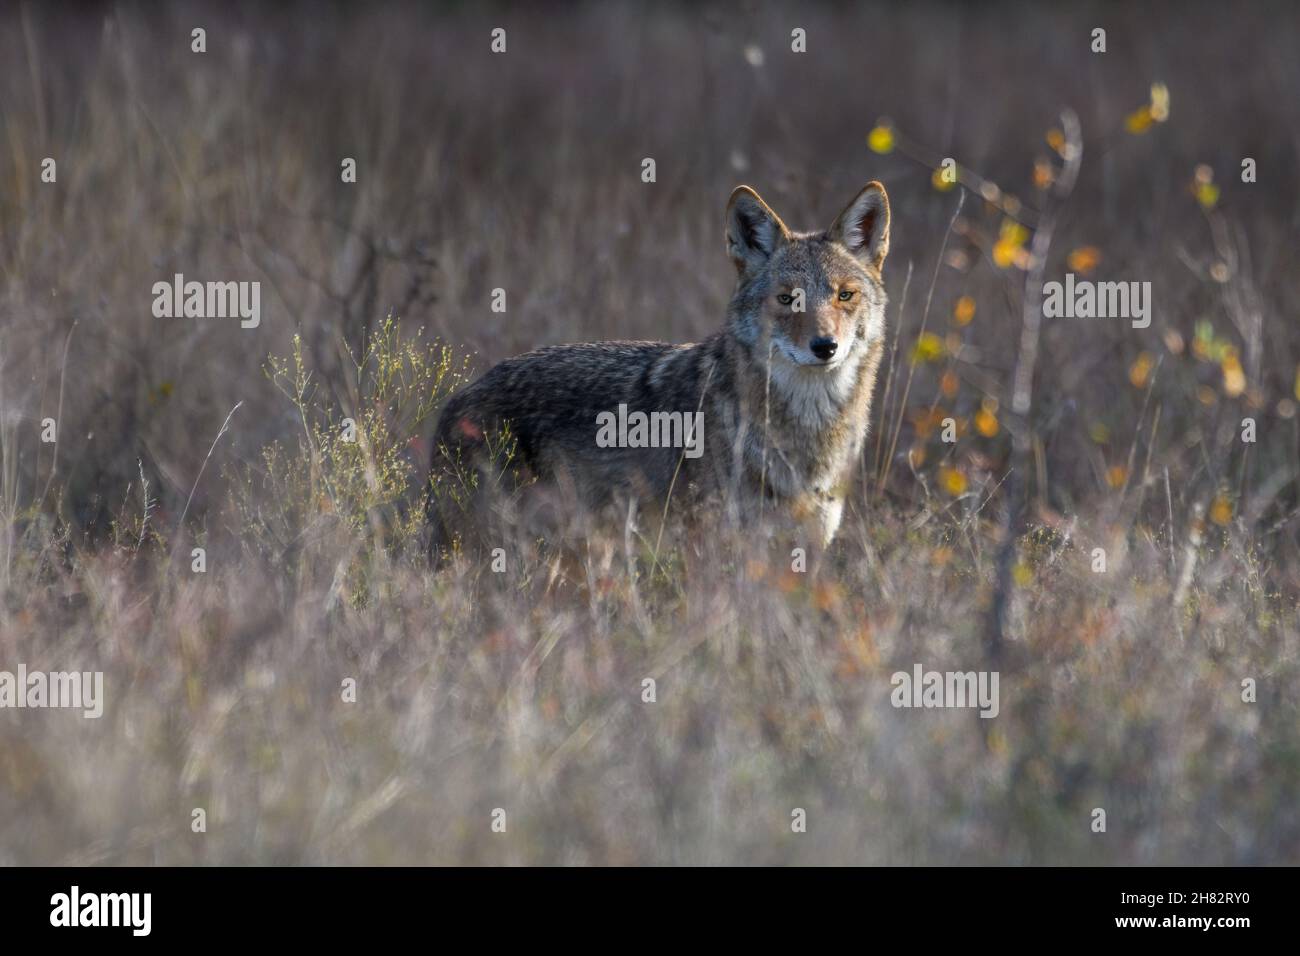 Coyote (Canis latrans) standing in tall prairie grass Stock Photo